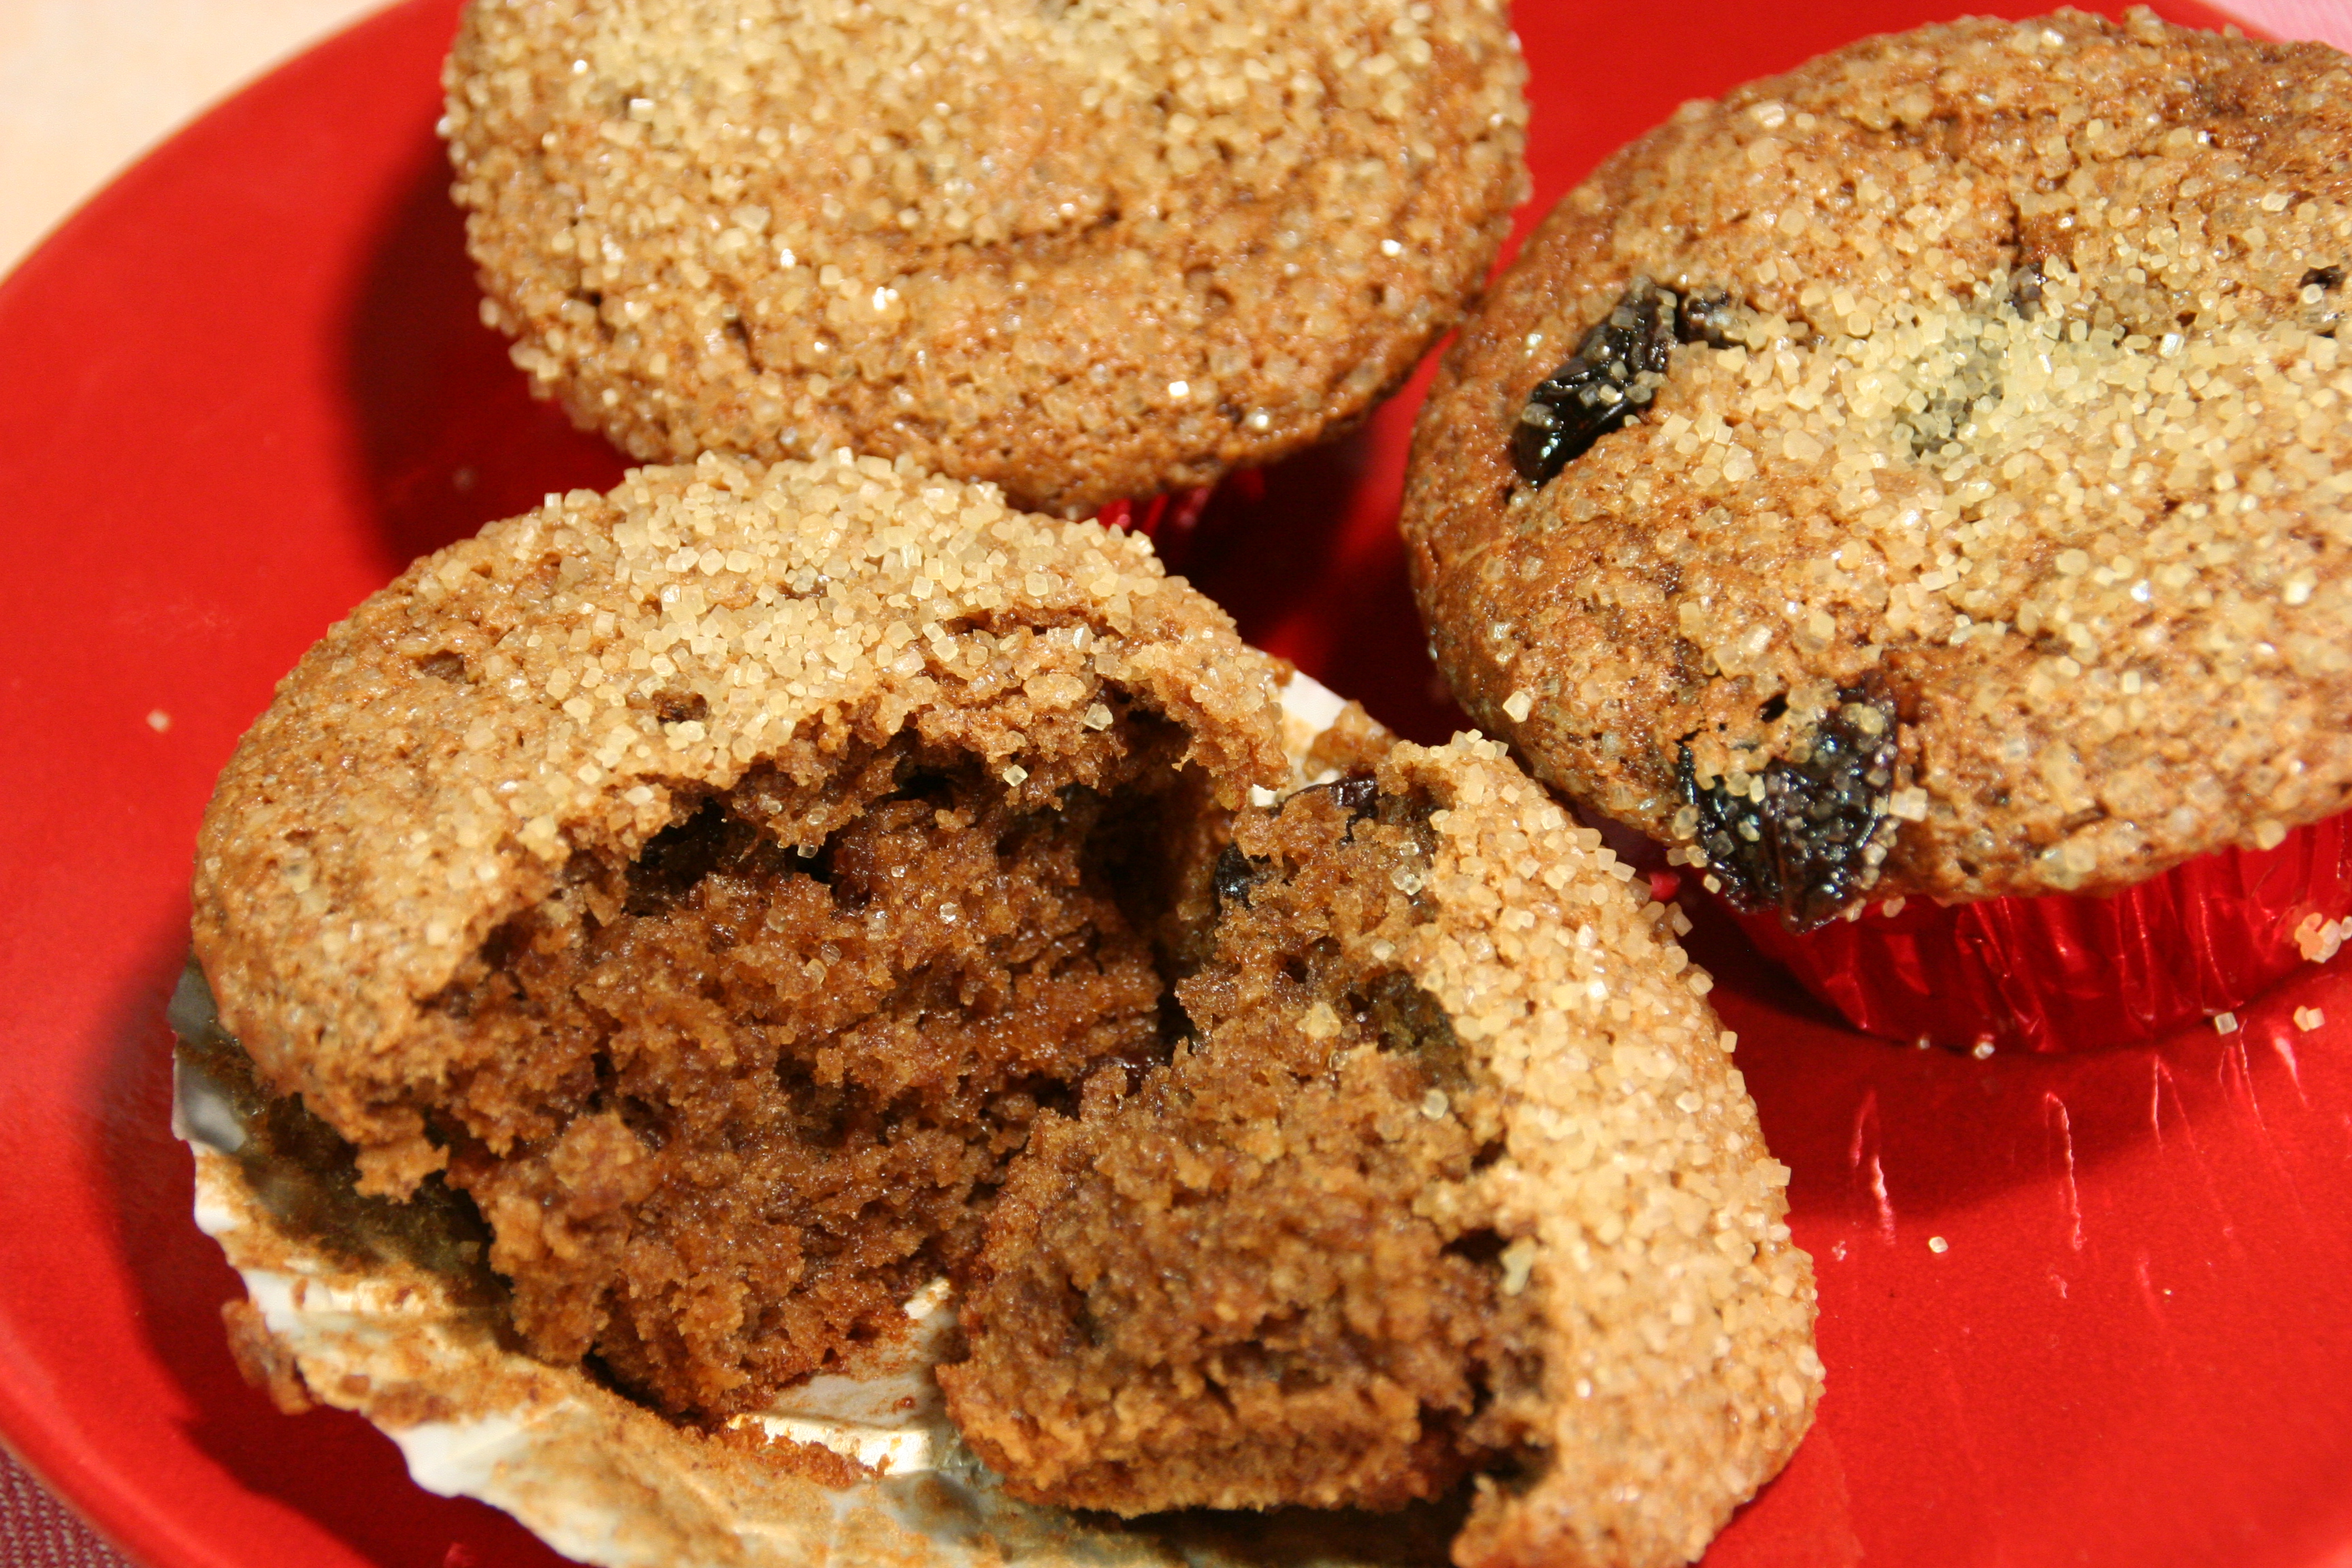 Peanut Butter and Banana Muffins with Cherries and Fresh Oat Flour